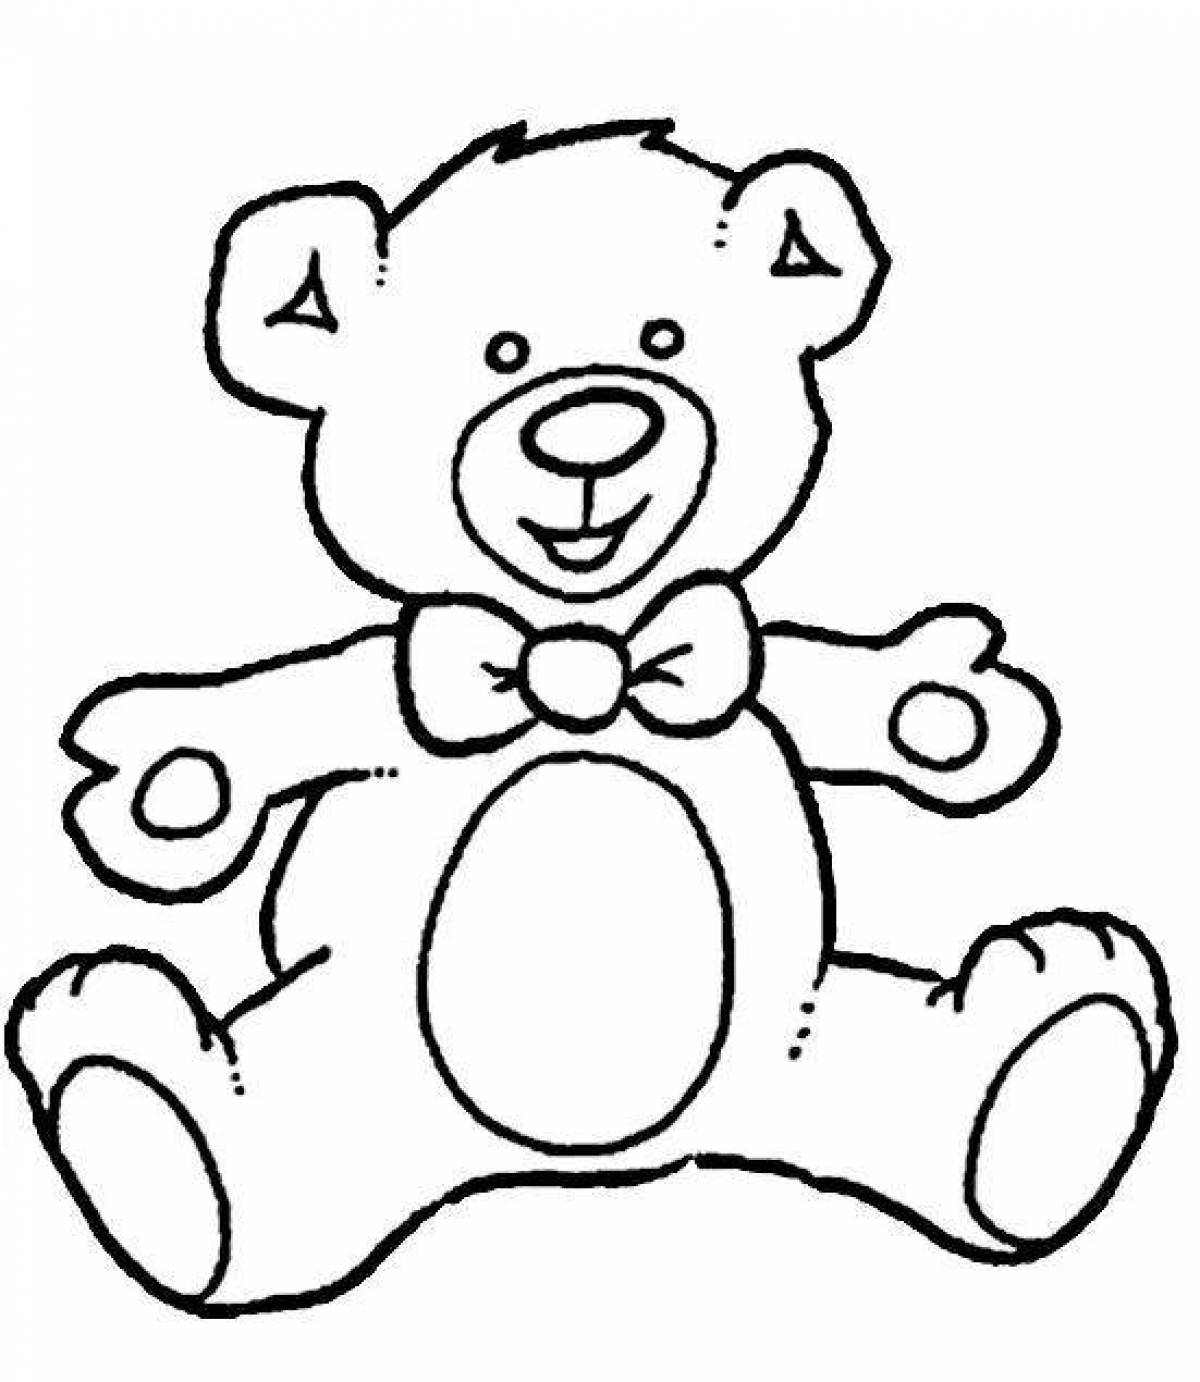 Outstanding bear coloring book for 2-3 year olds